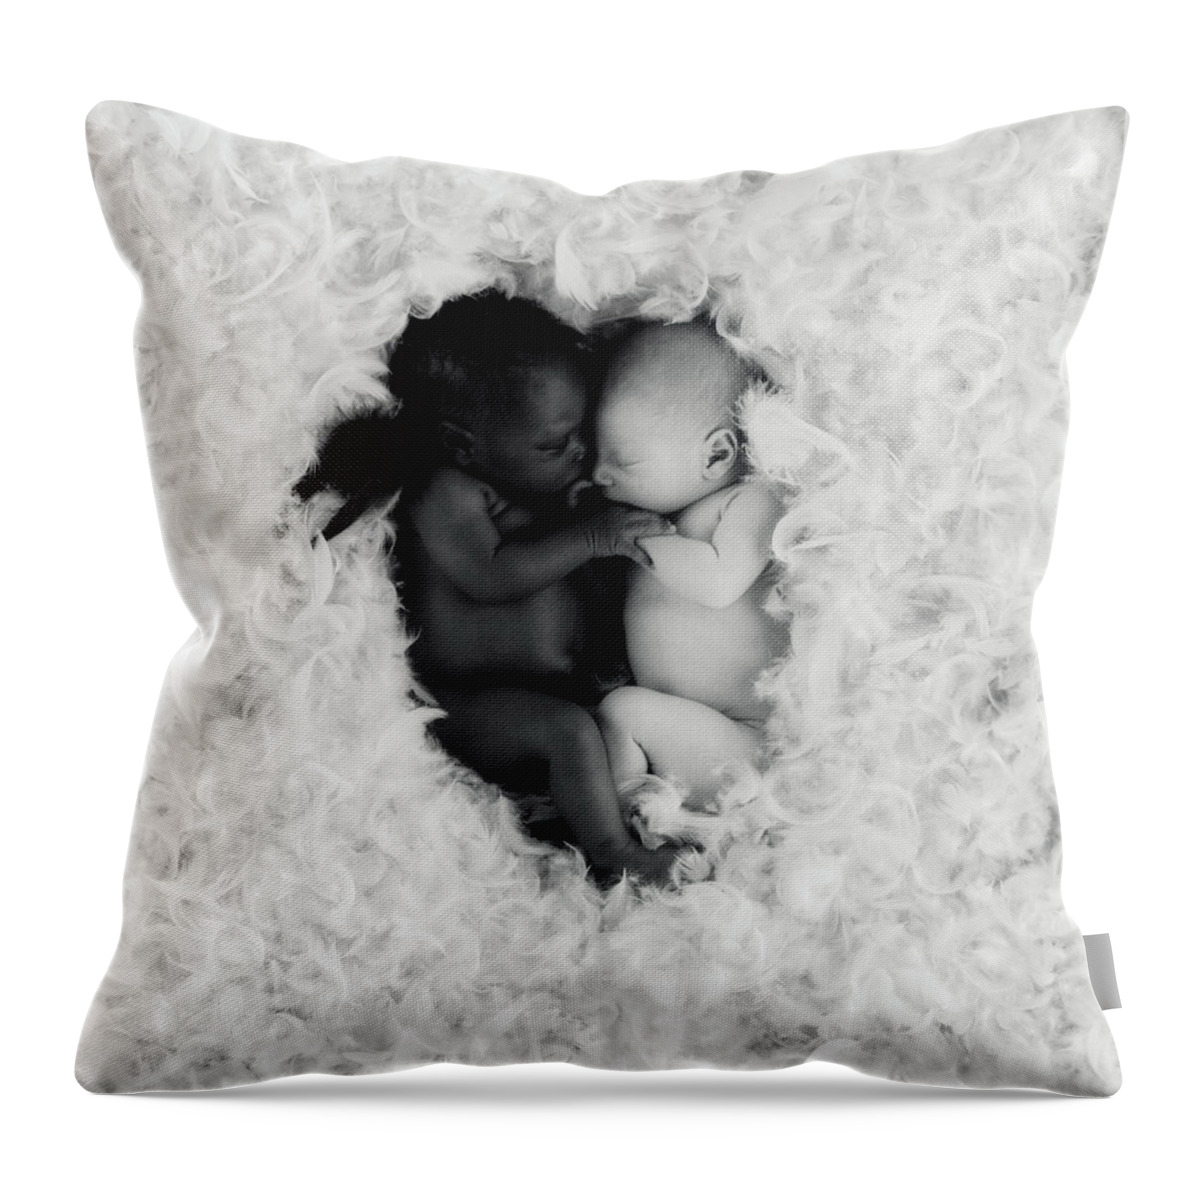 Black And White Throw Pillow featuring the photograph Angels by Anne Geddes